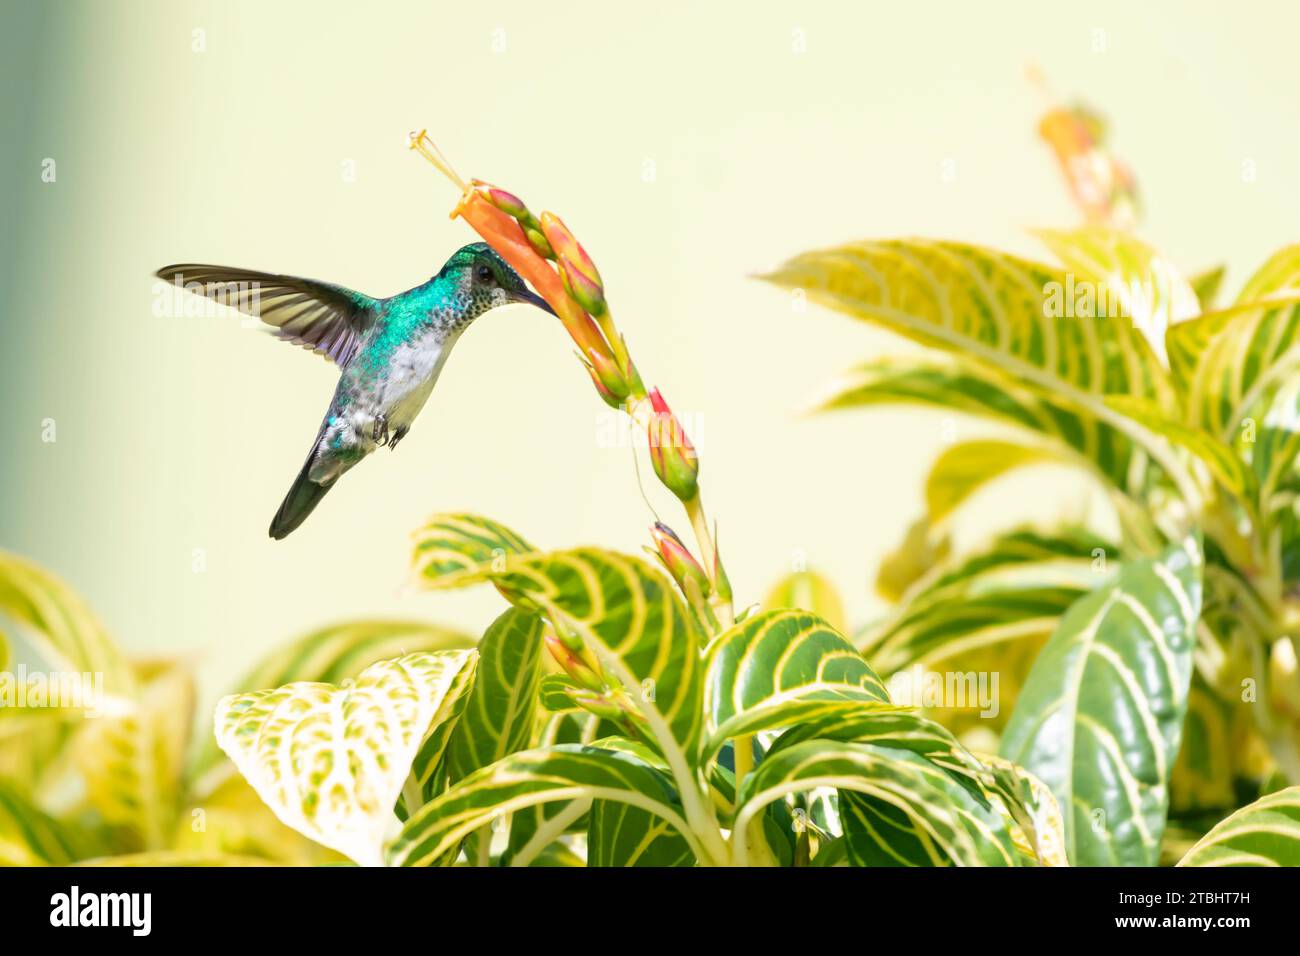 A Blue-chinned Sapphire hummingbird, Chlorestes Notata, feeding on orange flowers on a bright sunny day Stock Photo